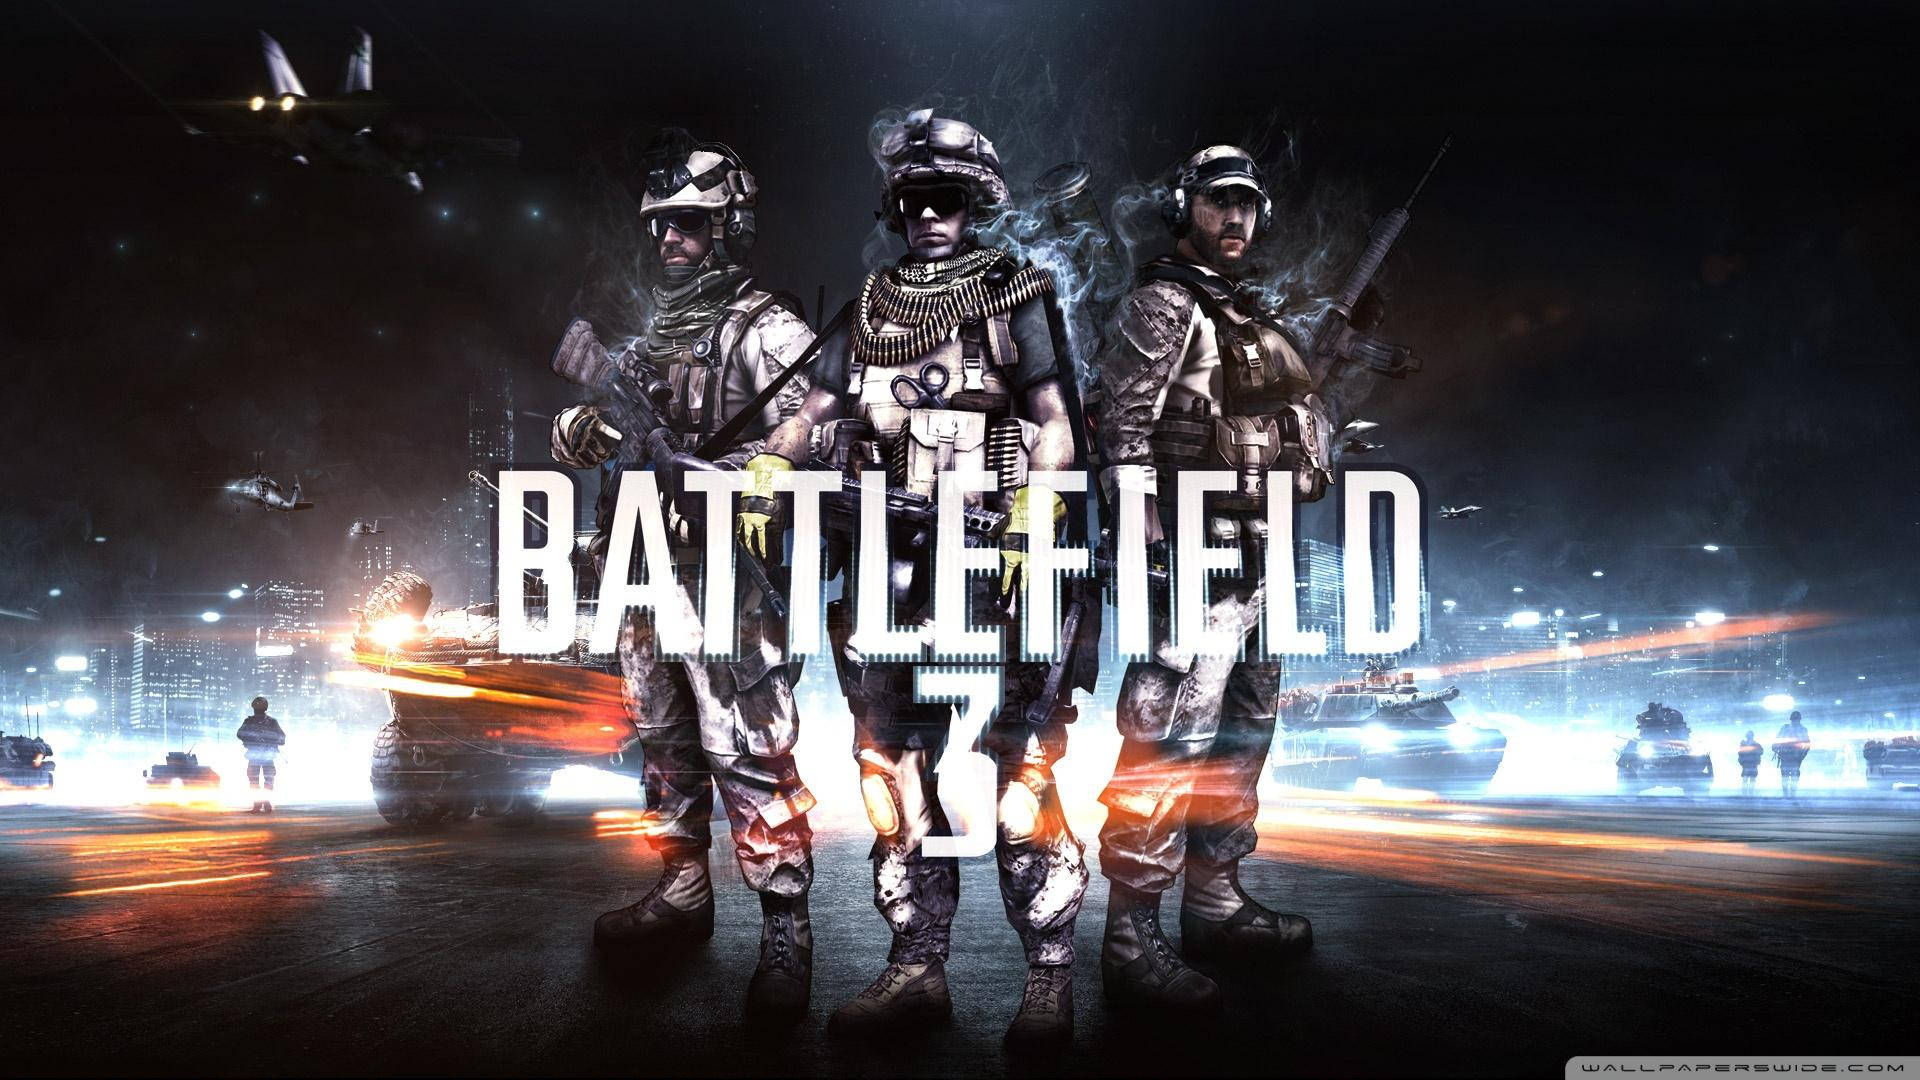 Battlefield 3 Characters Poster Background